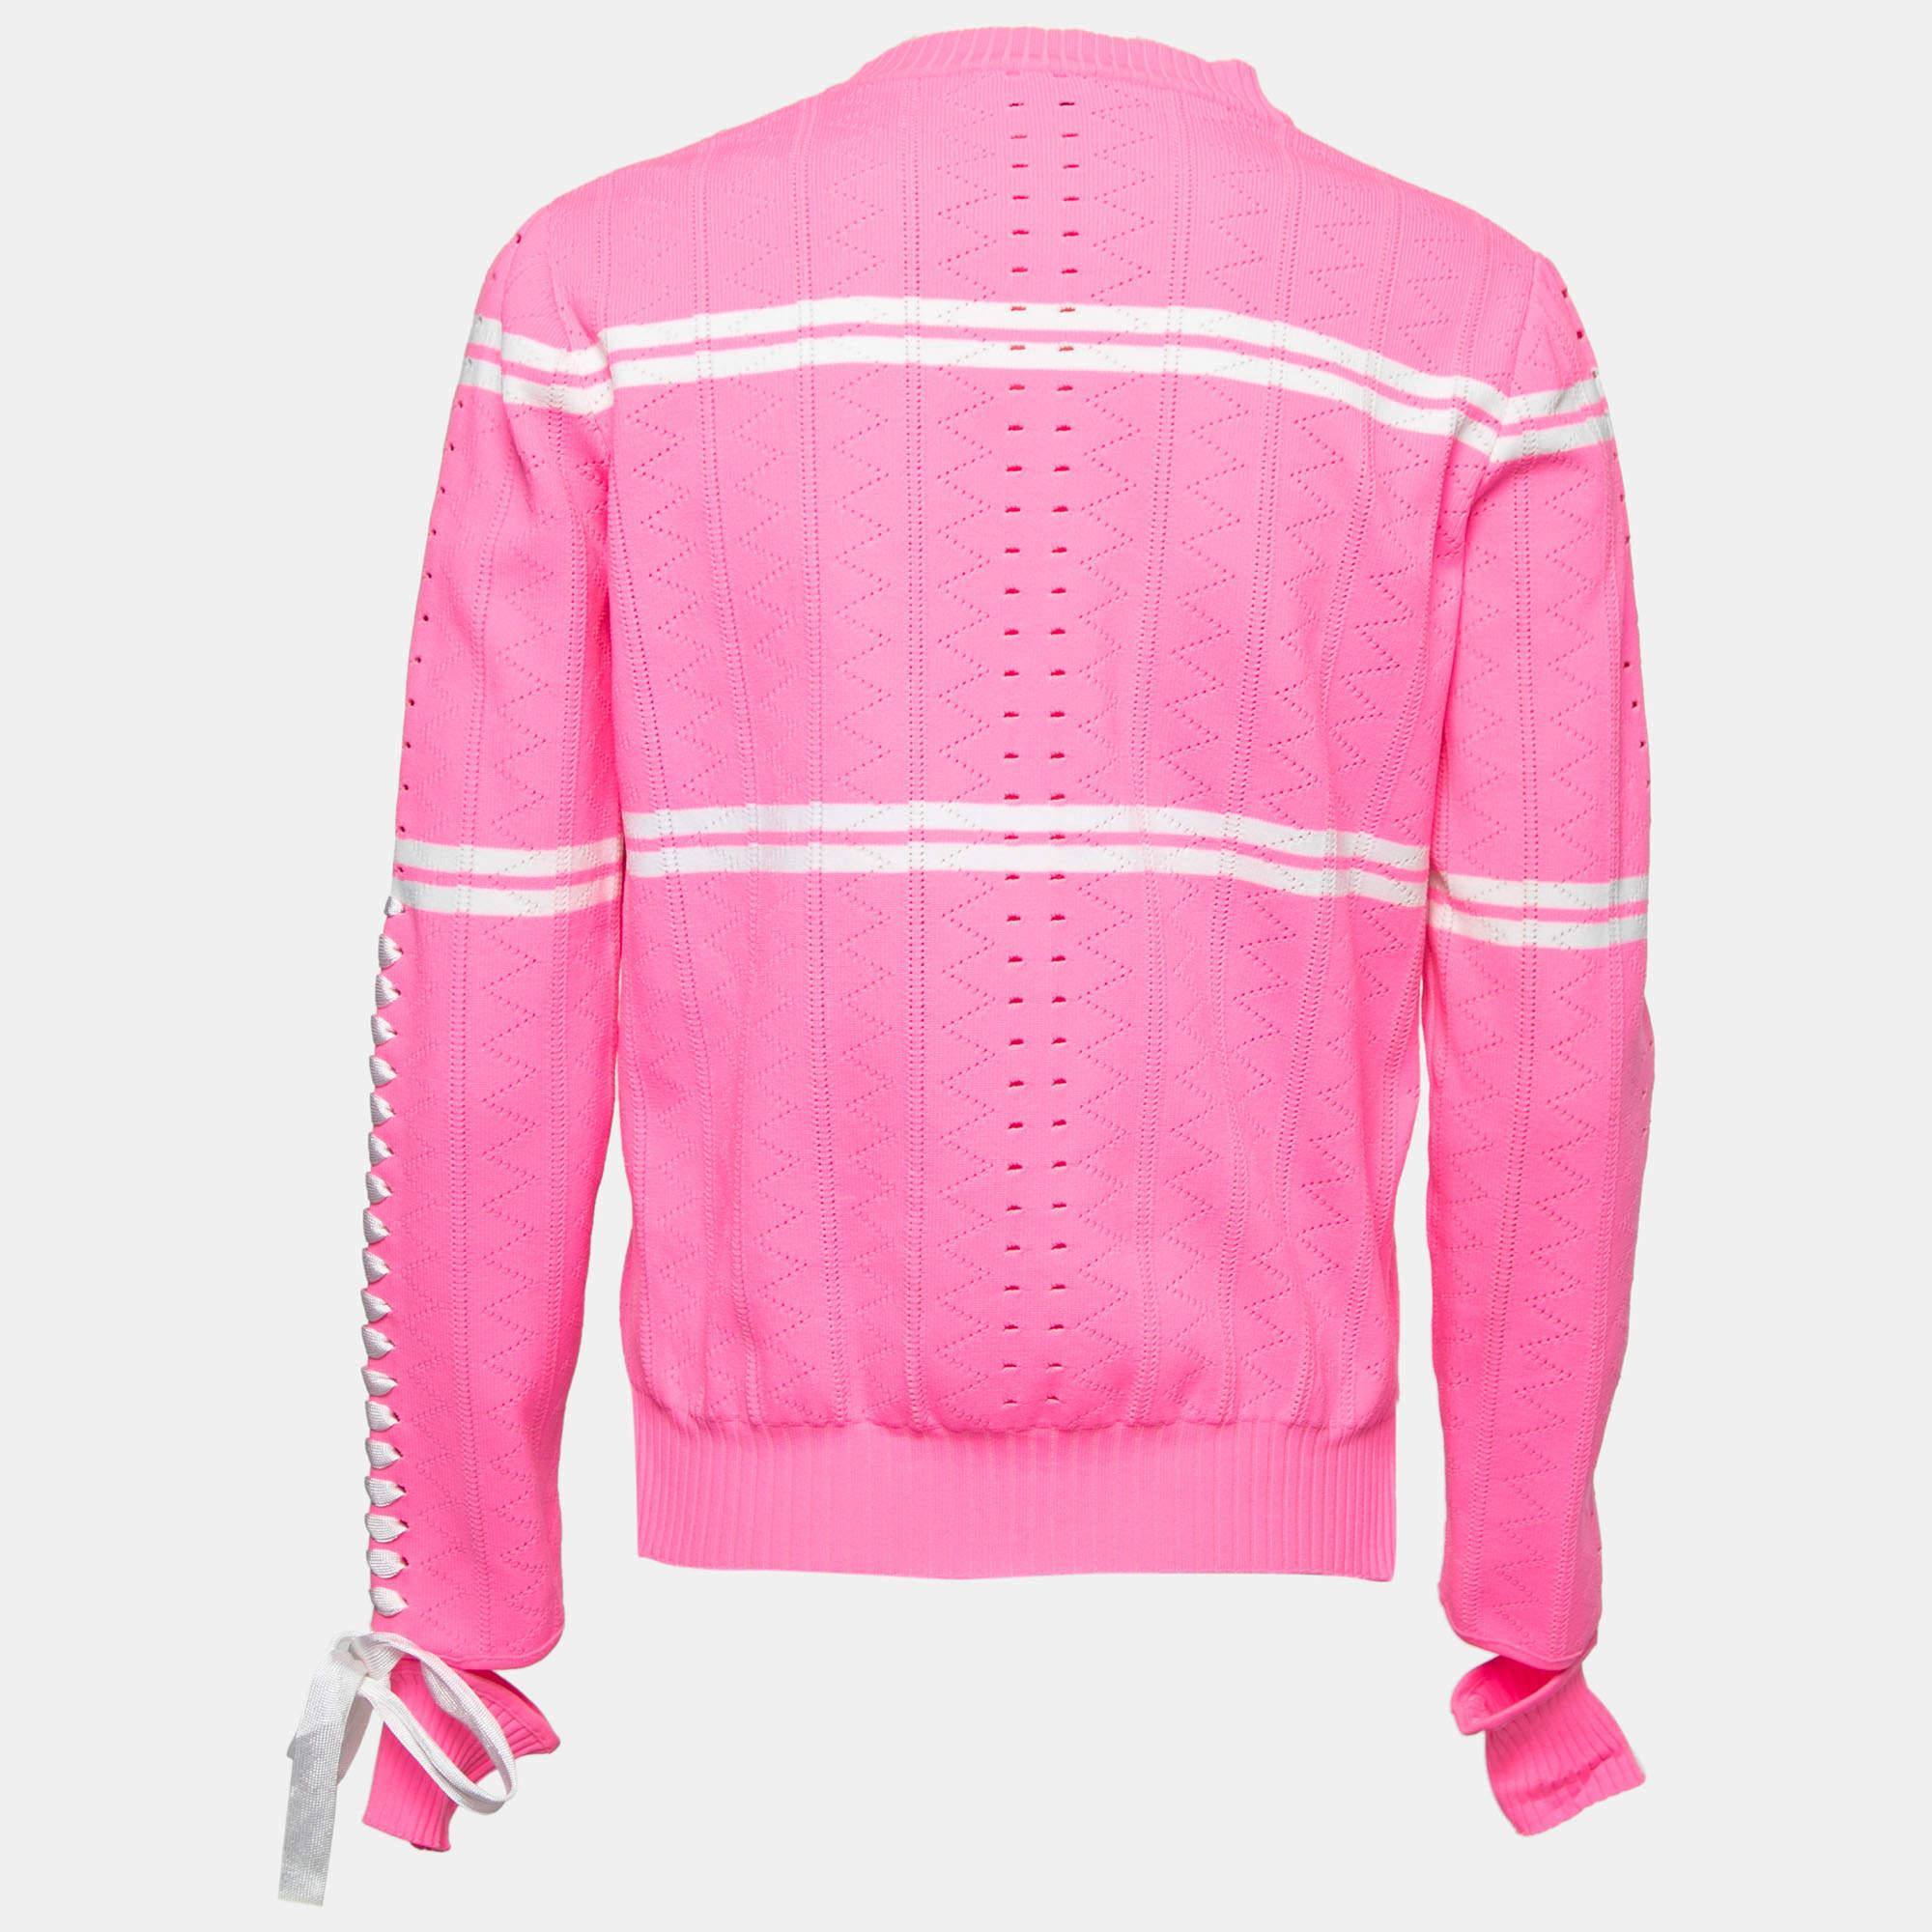 How fabulous does this designer jumper look! It is made of fine materials and features long sleeves. Pair it with pants and sneakers for a cool look.

